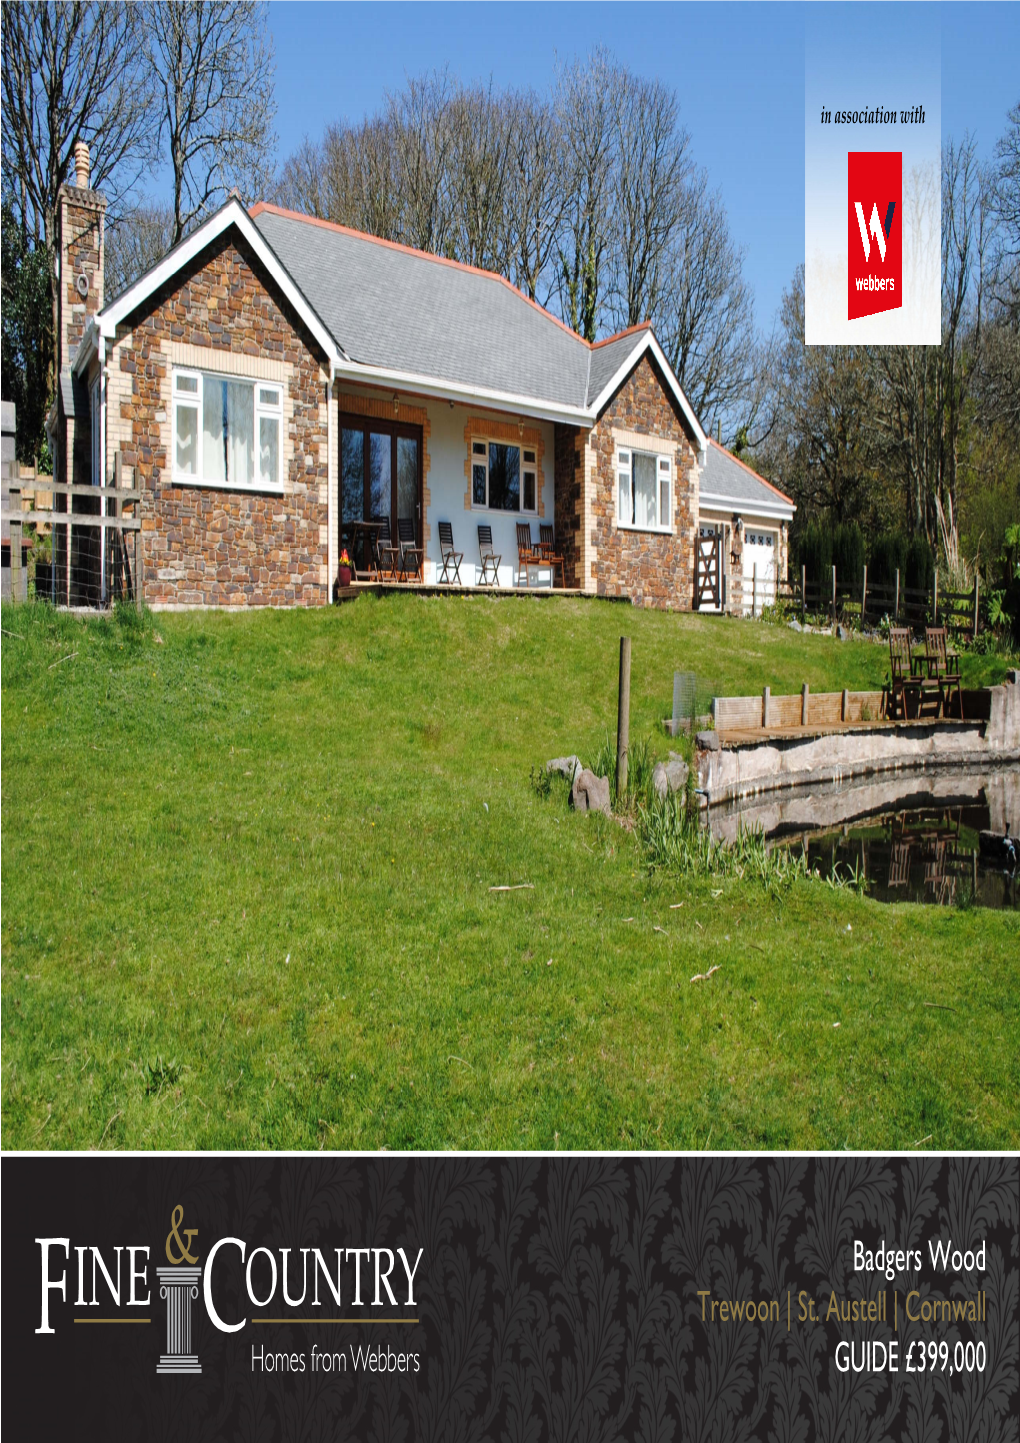 Badgers Wood Trewoon | St. Austell | Cornwall GUIDE £39 9,000